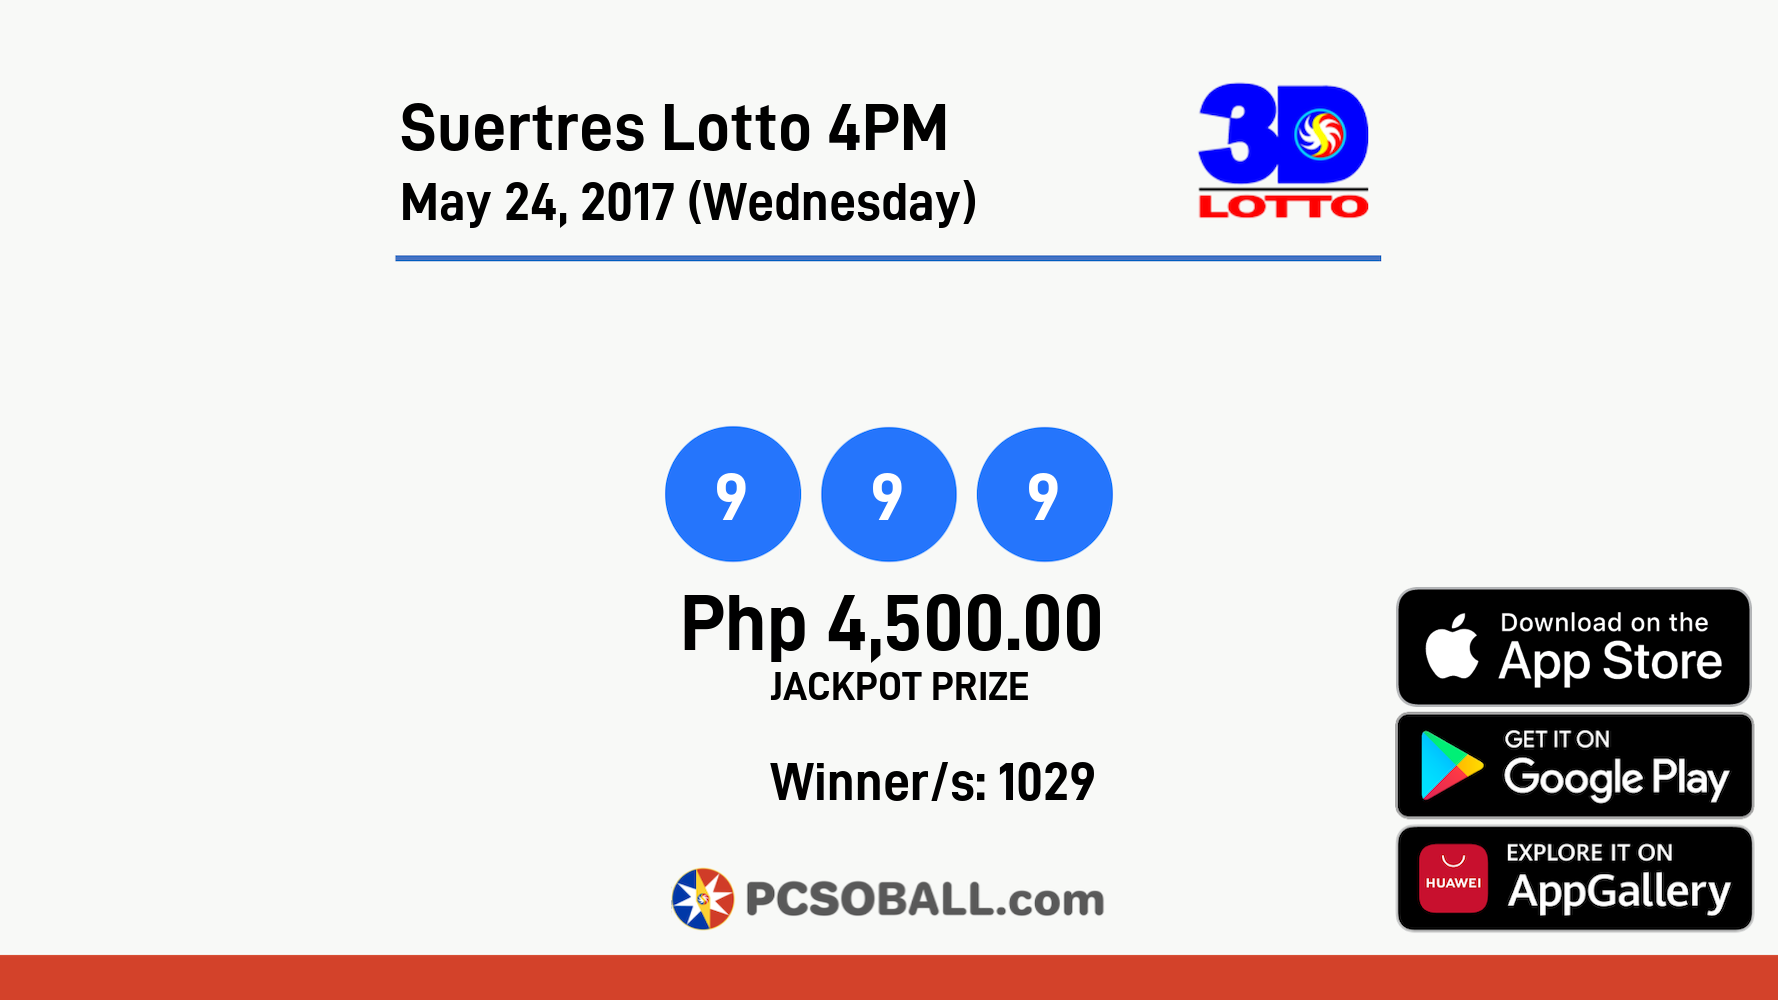 Suertres Lotto 4PM May 24, 2017 (Wednesday) Result